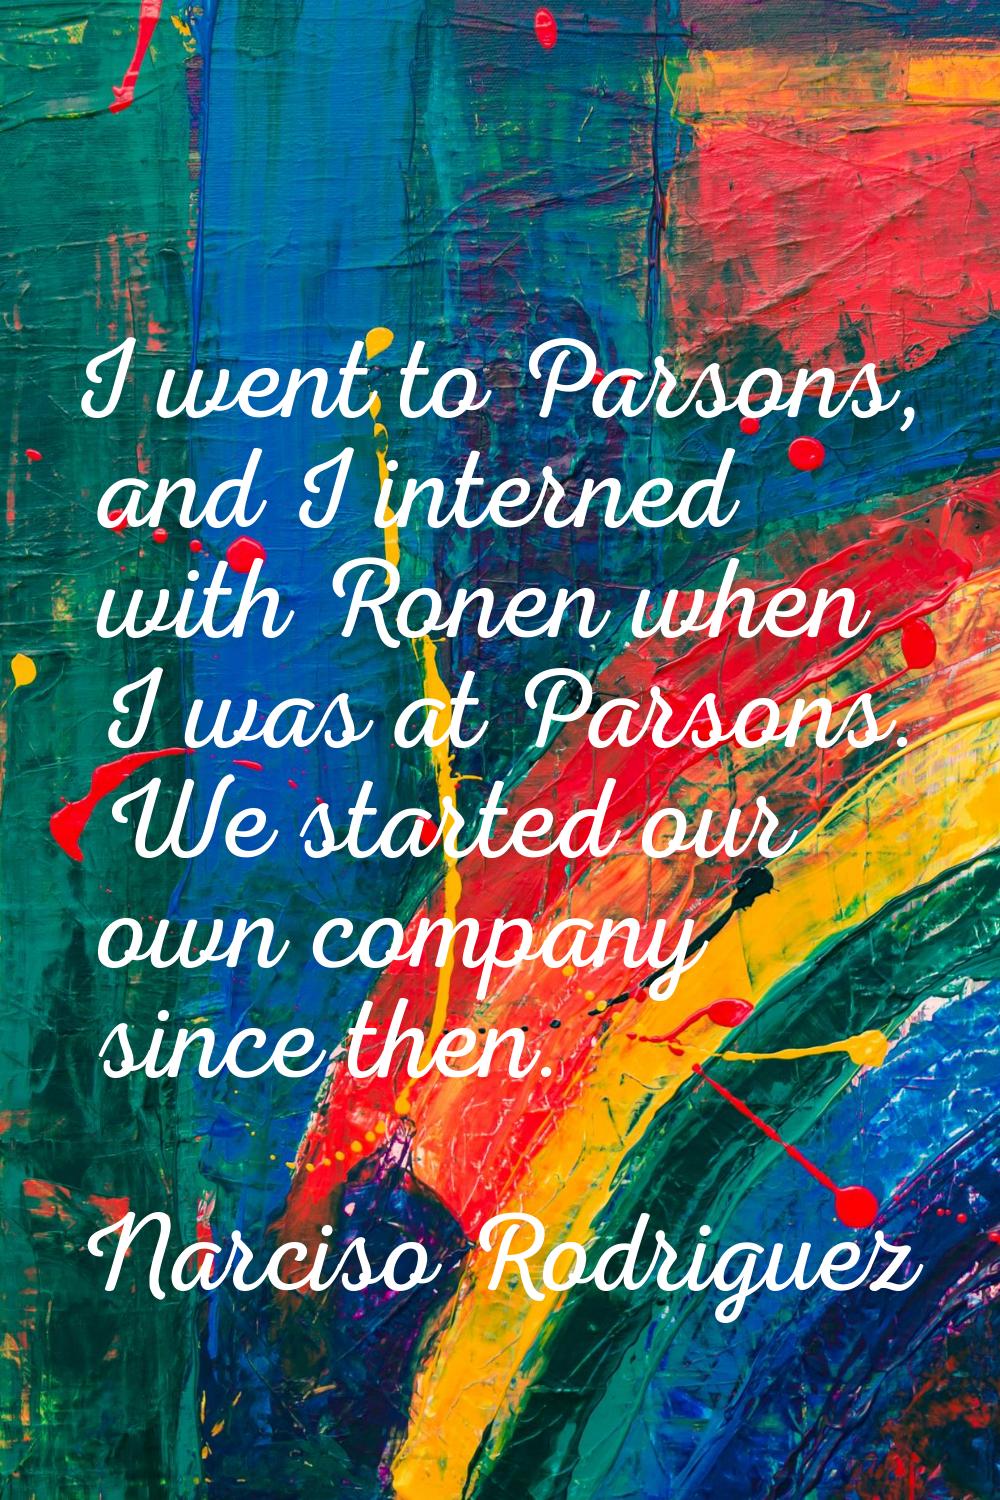 I went to Parsons, and I interned with Ronen when I was at Parsons. We started our own company sinc